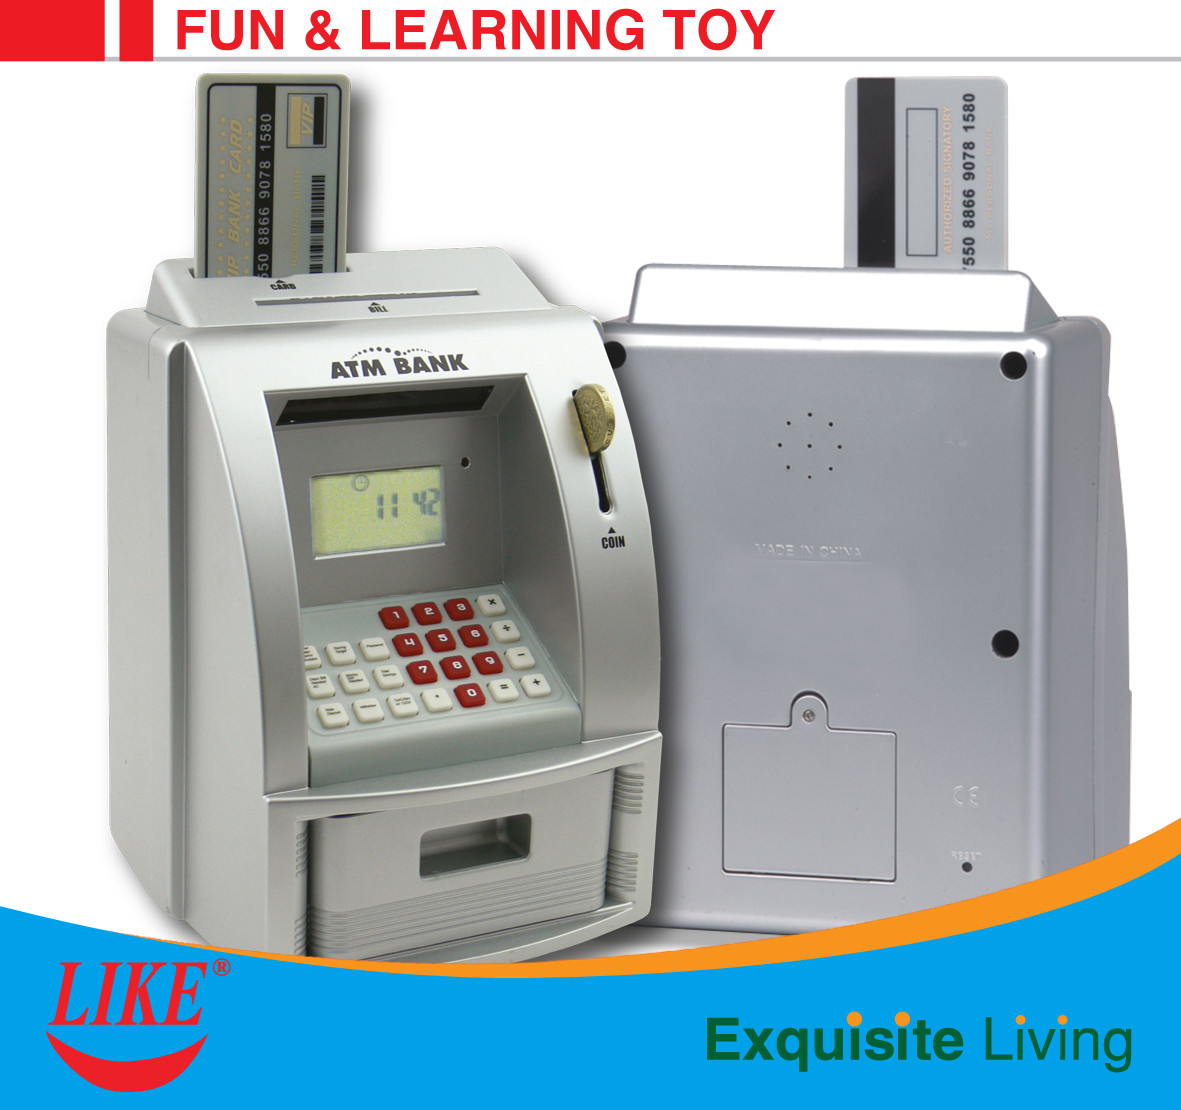 Buy cheap ATM piggy bank electronic toy Blue/White Color USD currency recoginition ABS from wholesalers